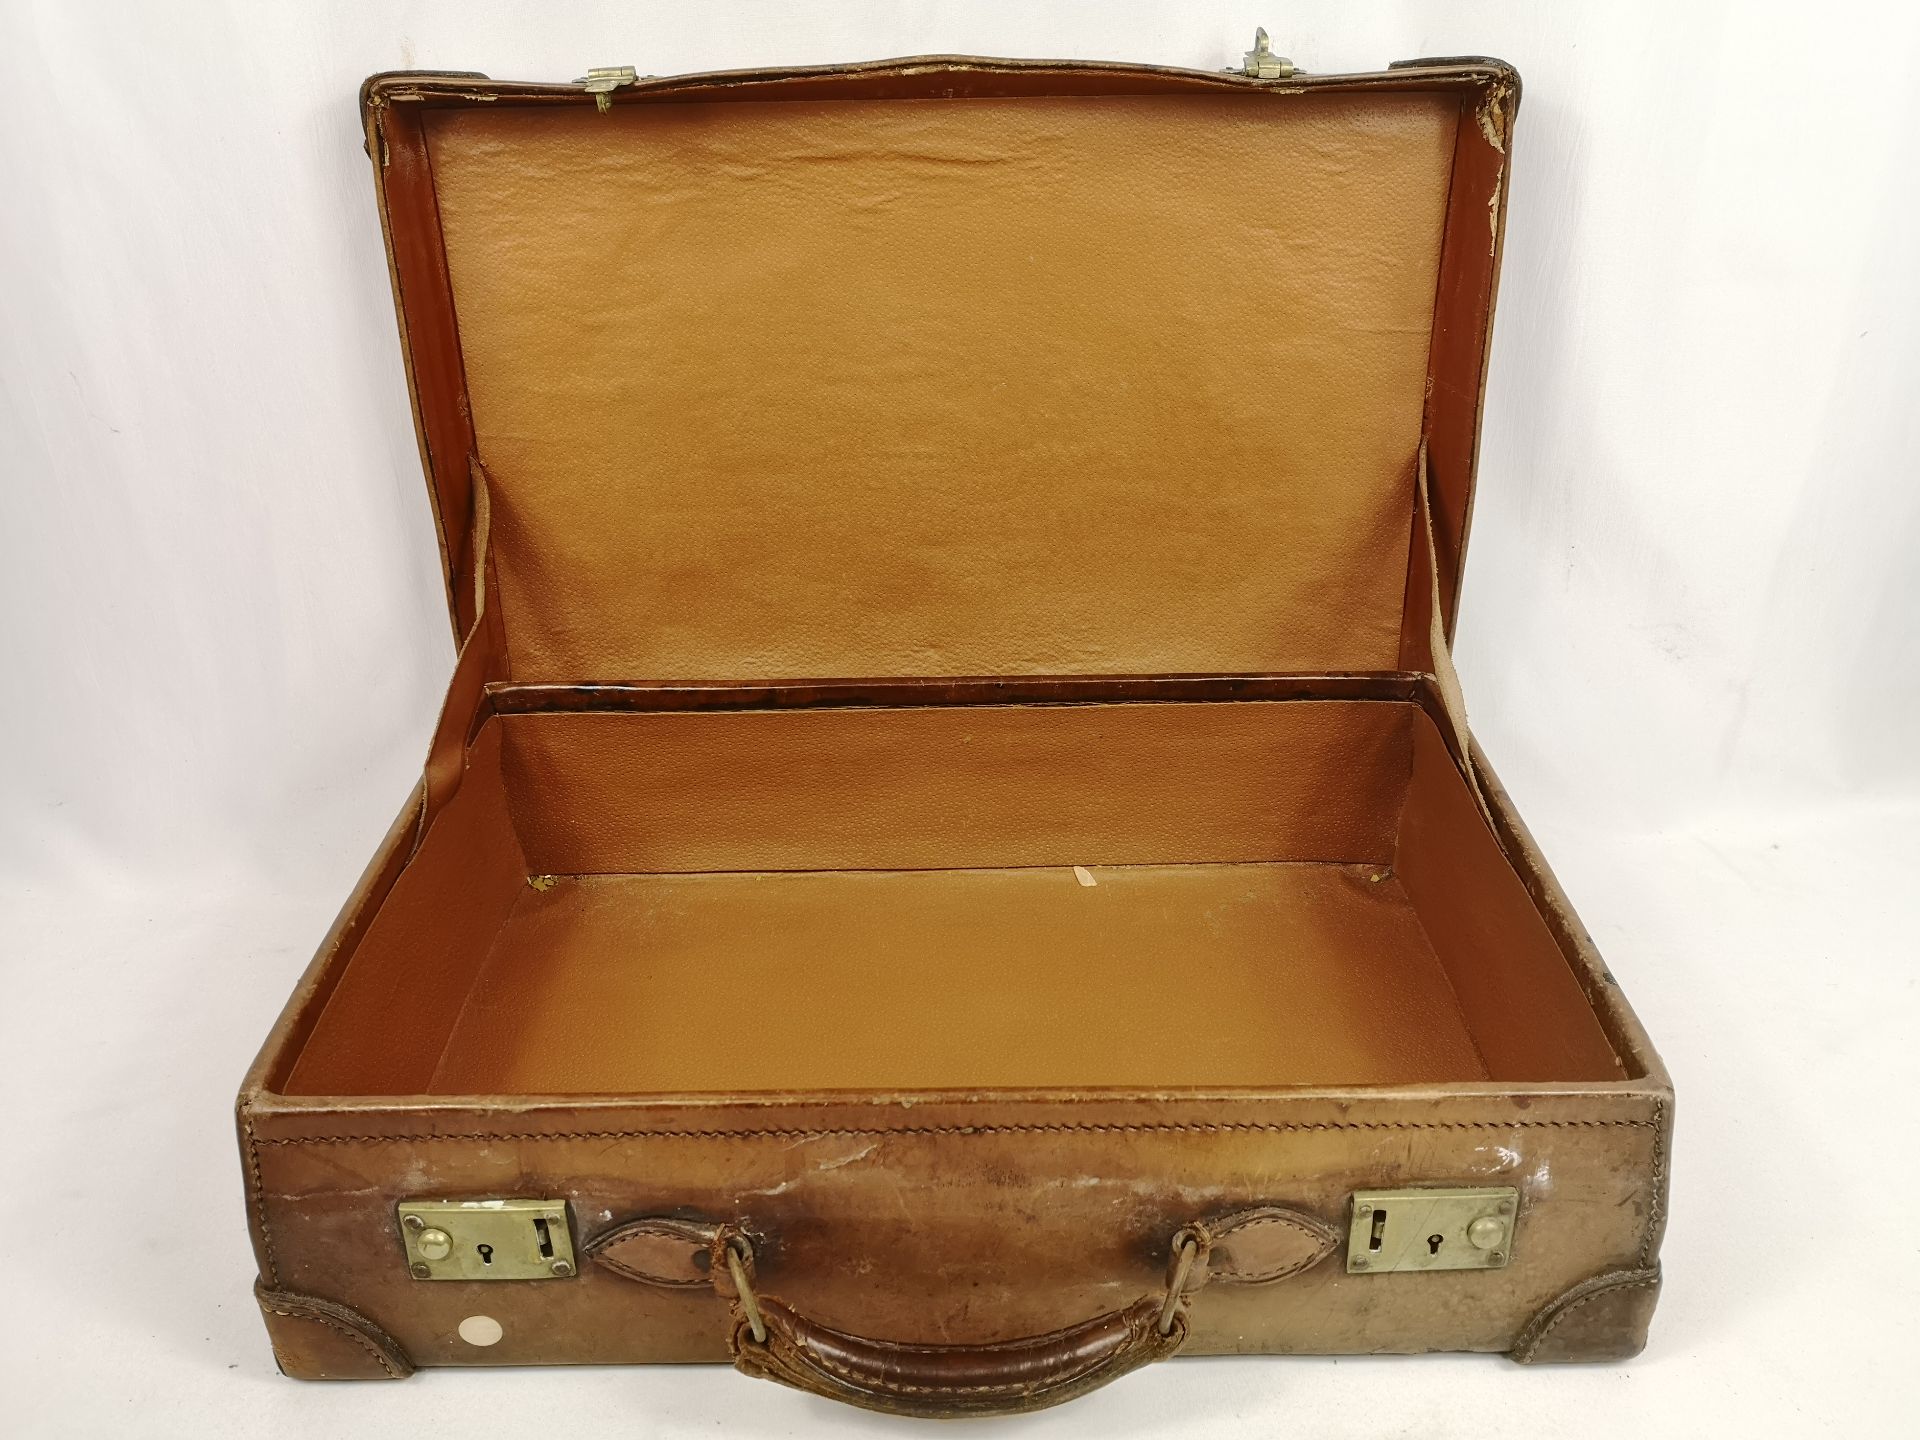 Cross leather suitcase - Image 3 of 4